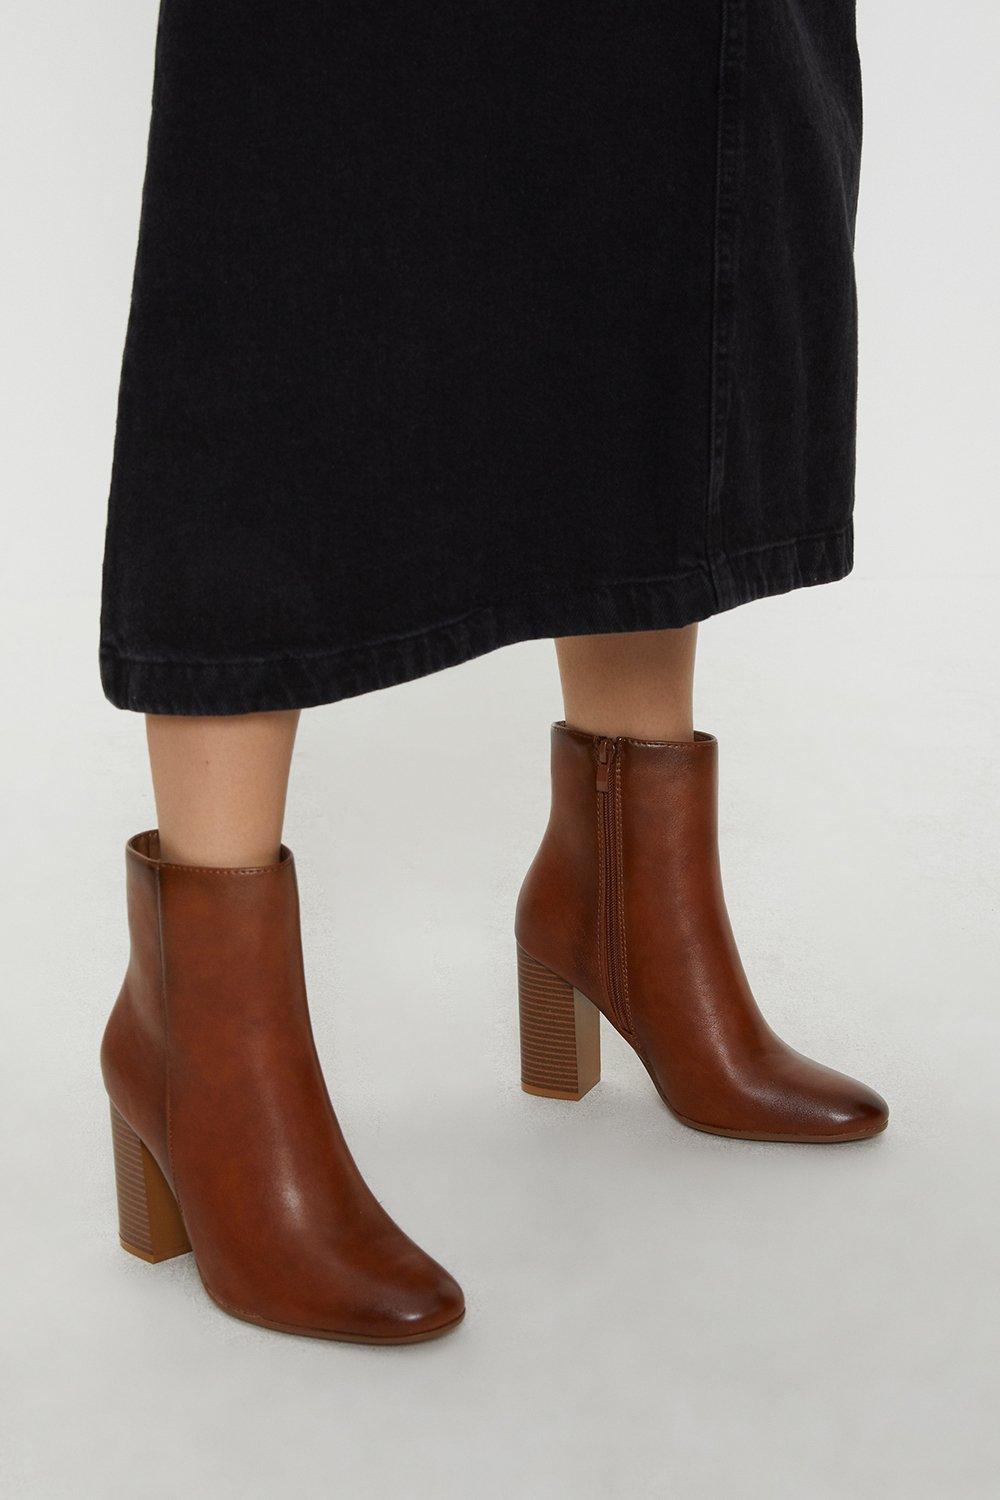 Round Toe Stacked Heel Ankle Bootstan